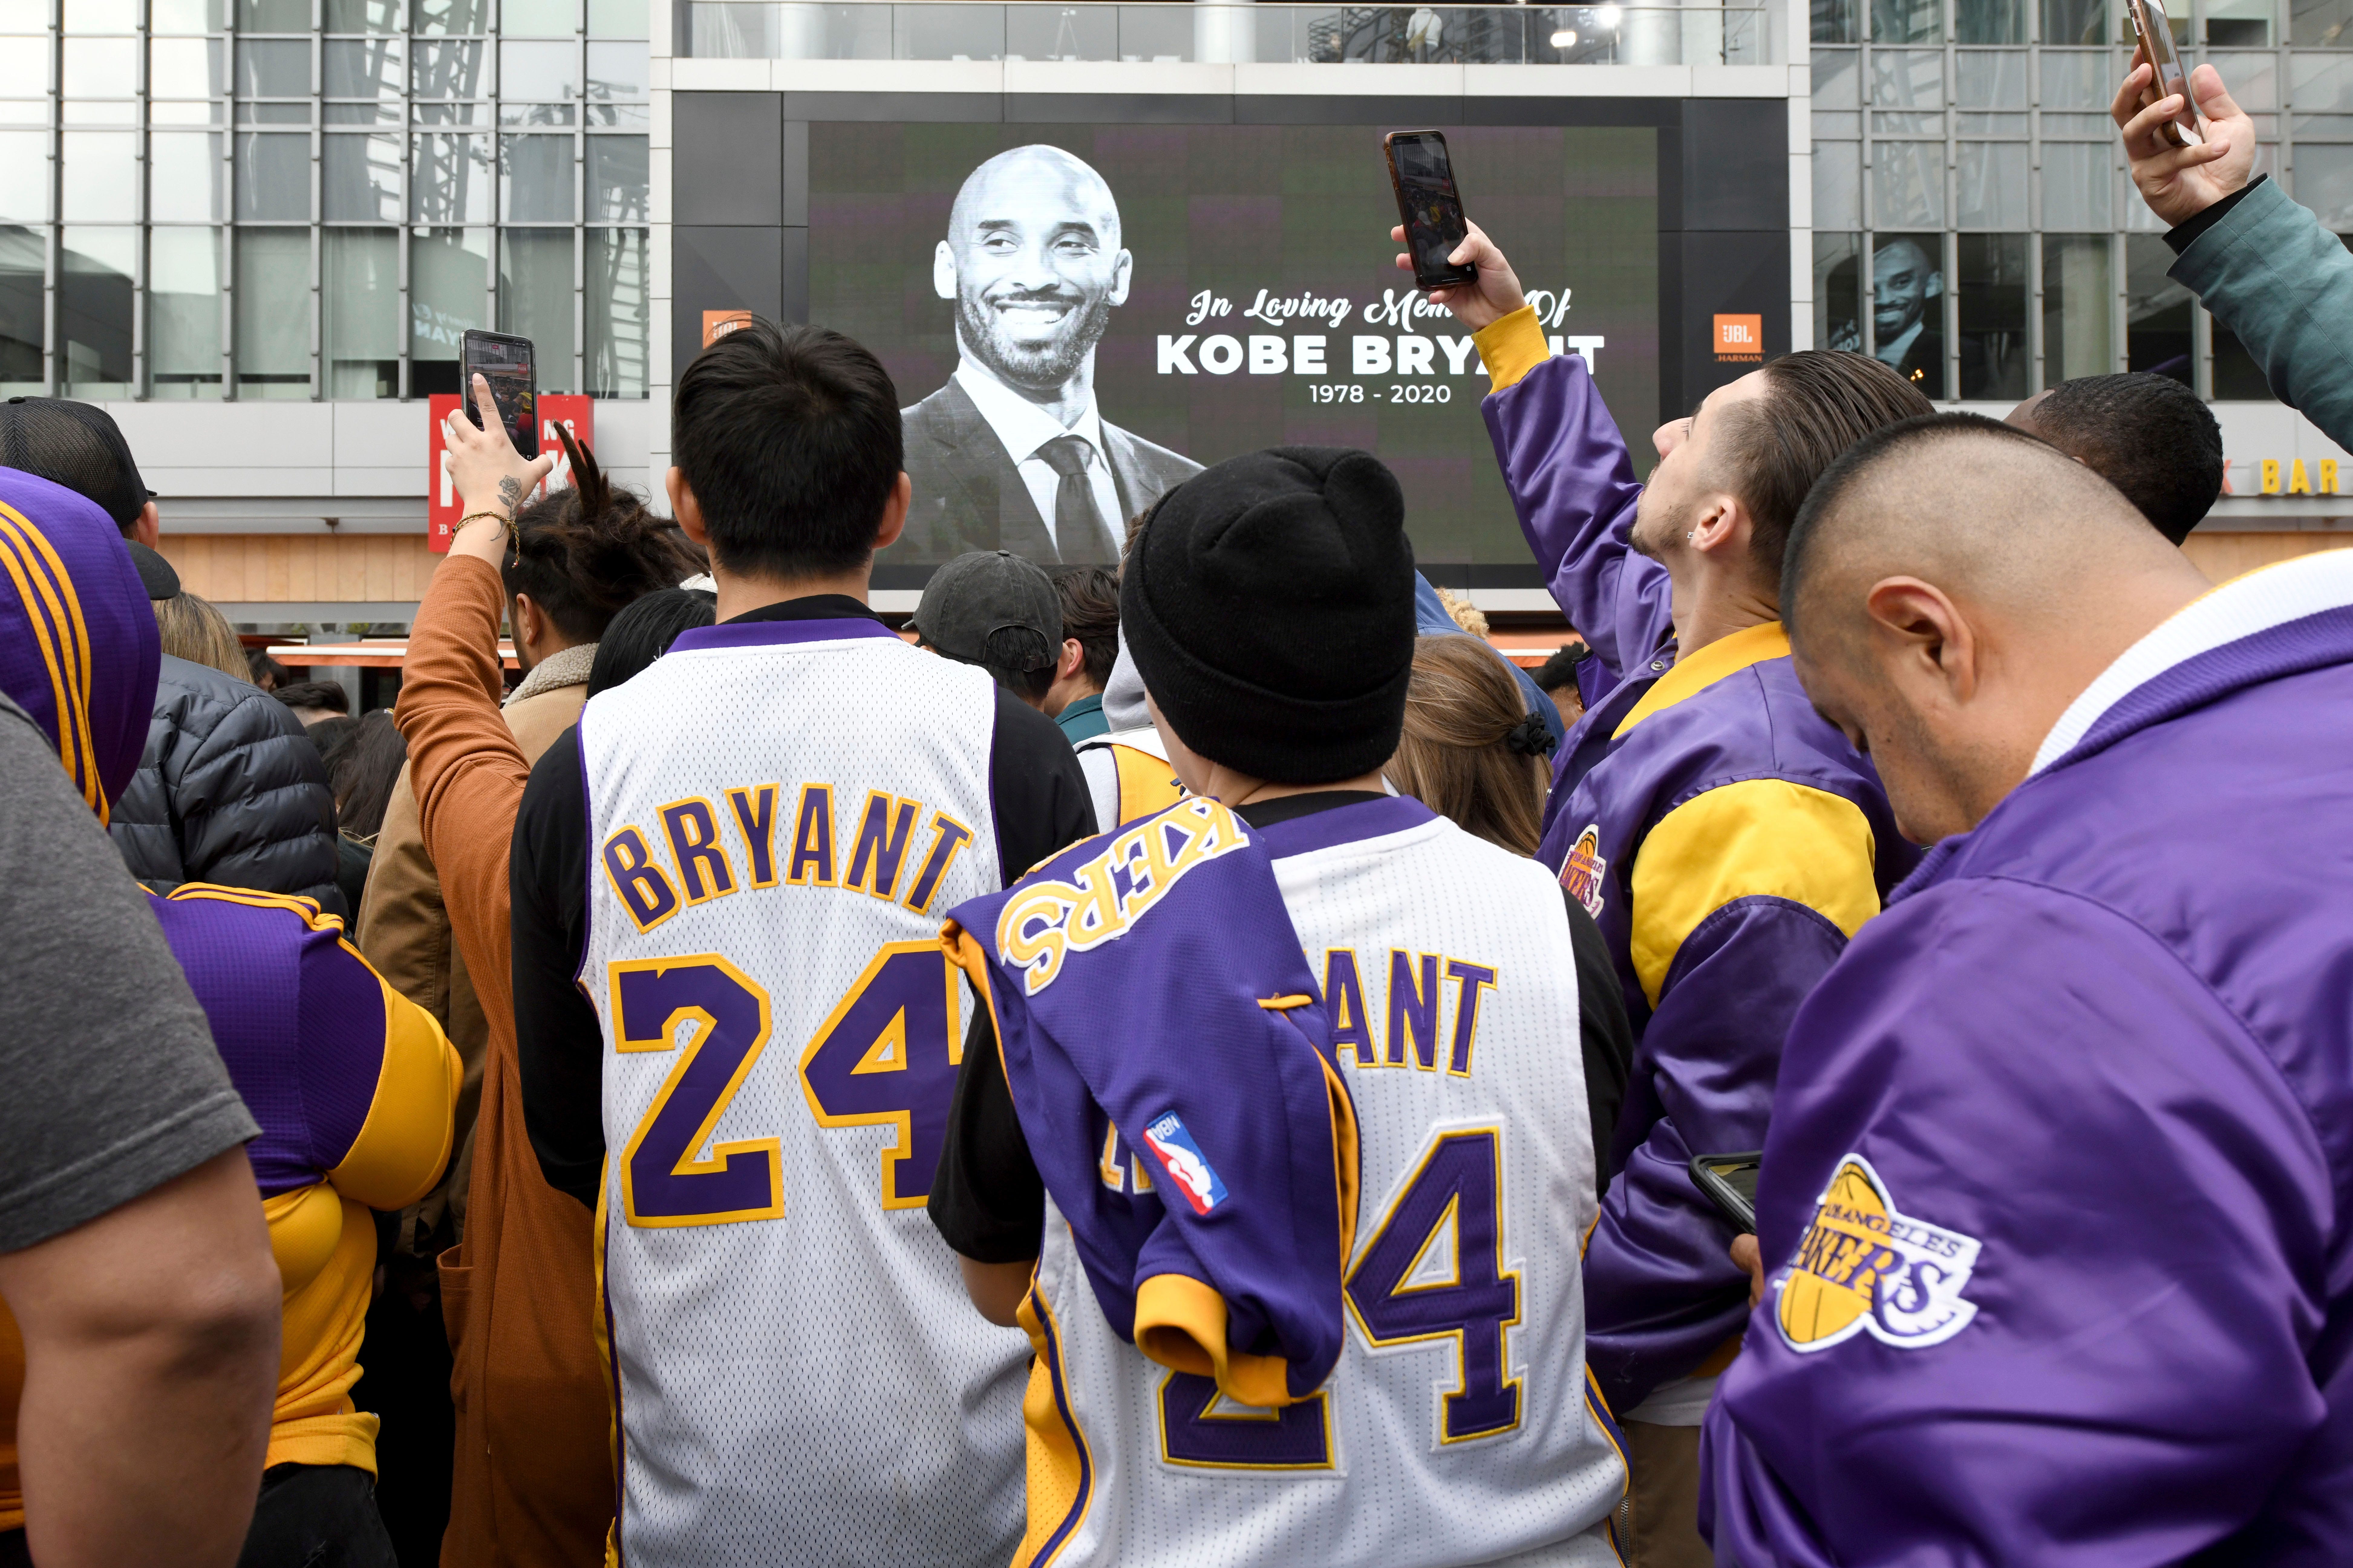 People gather outside Staples Center after the death of Laker legend Kobe Bryant.